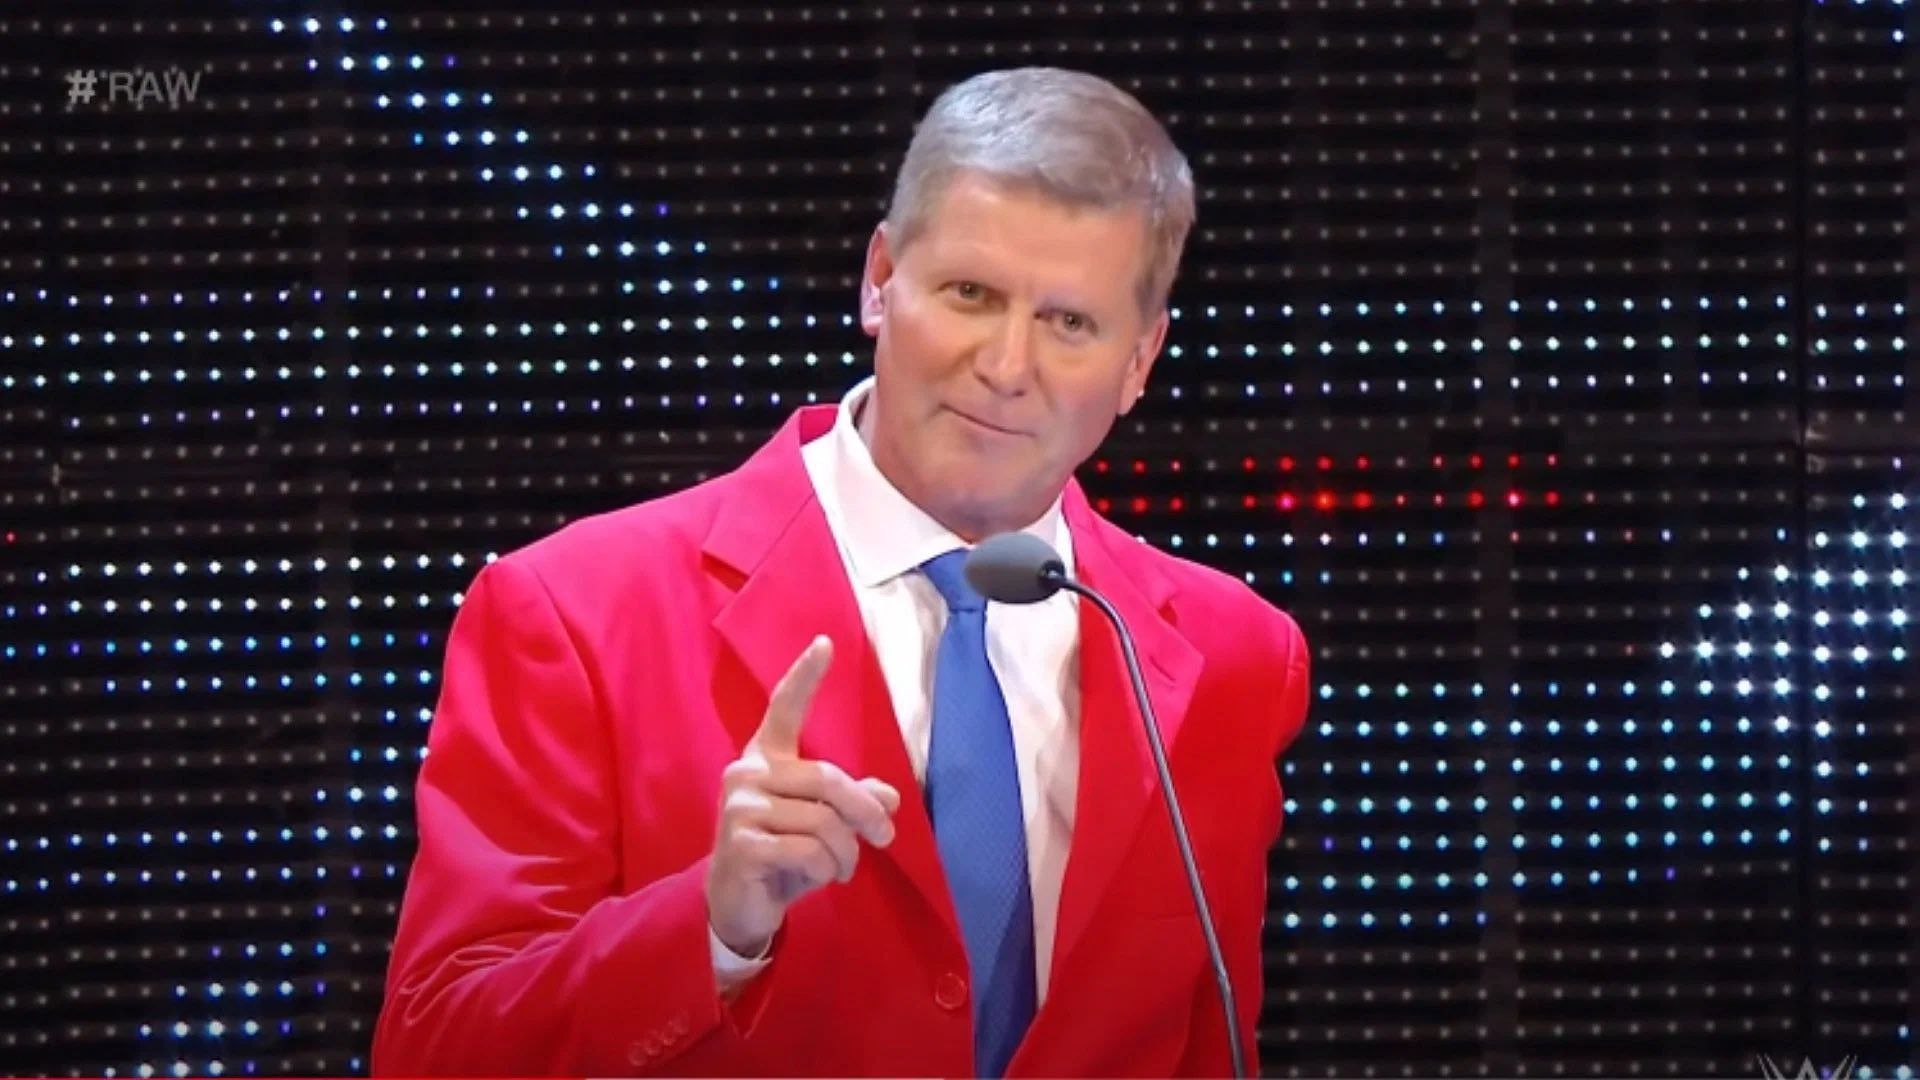 John Laurinaitis is currently 59 years old.